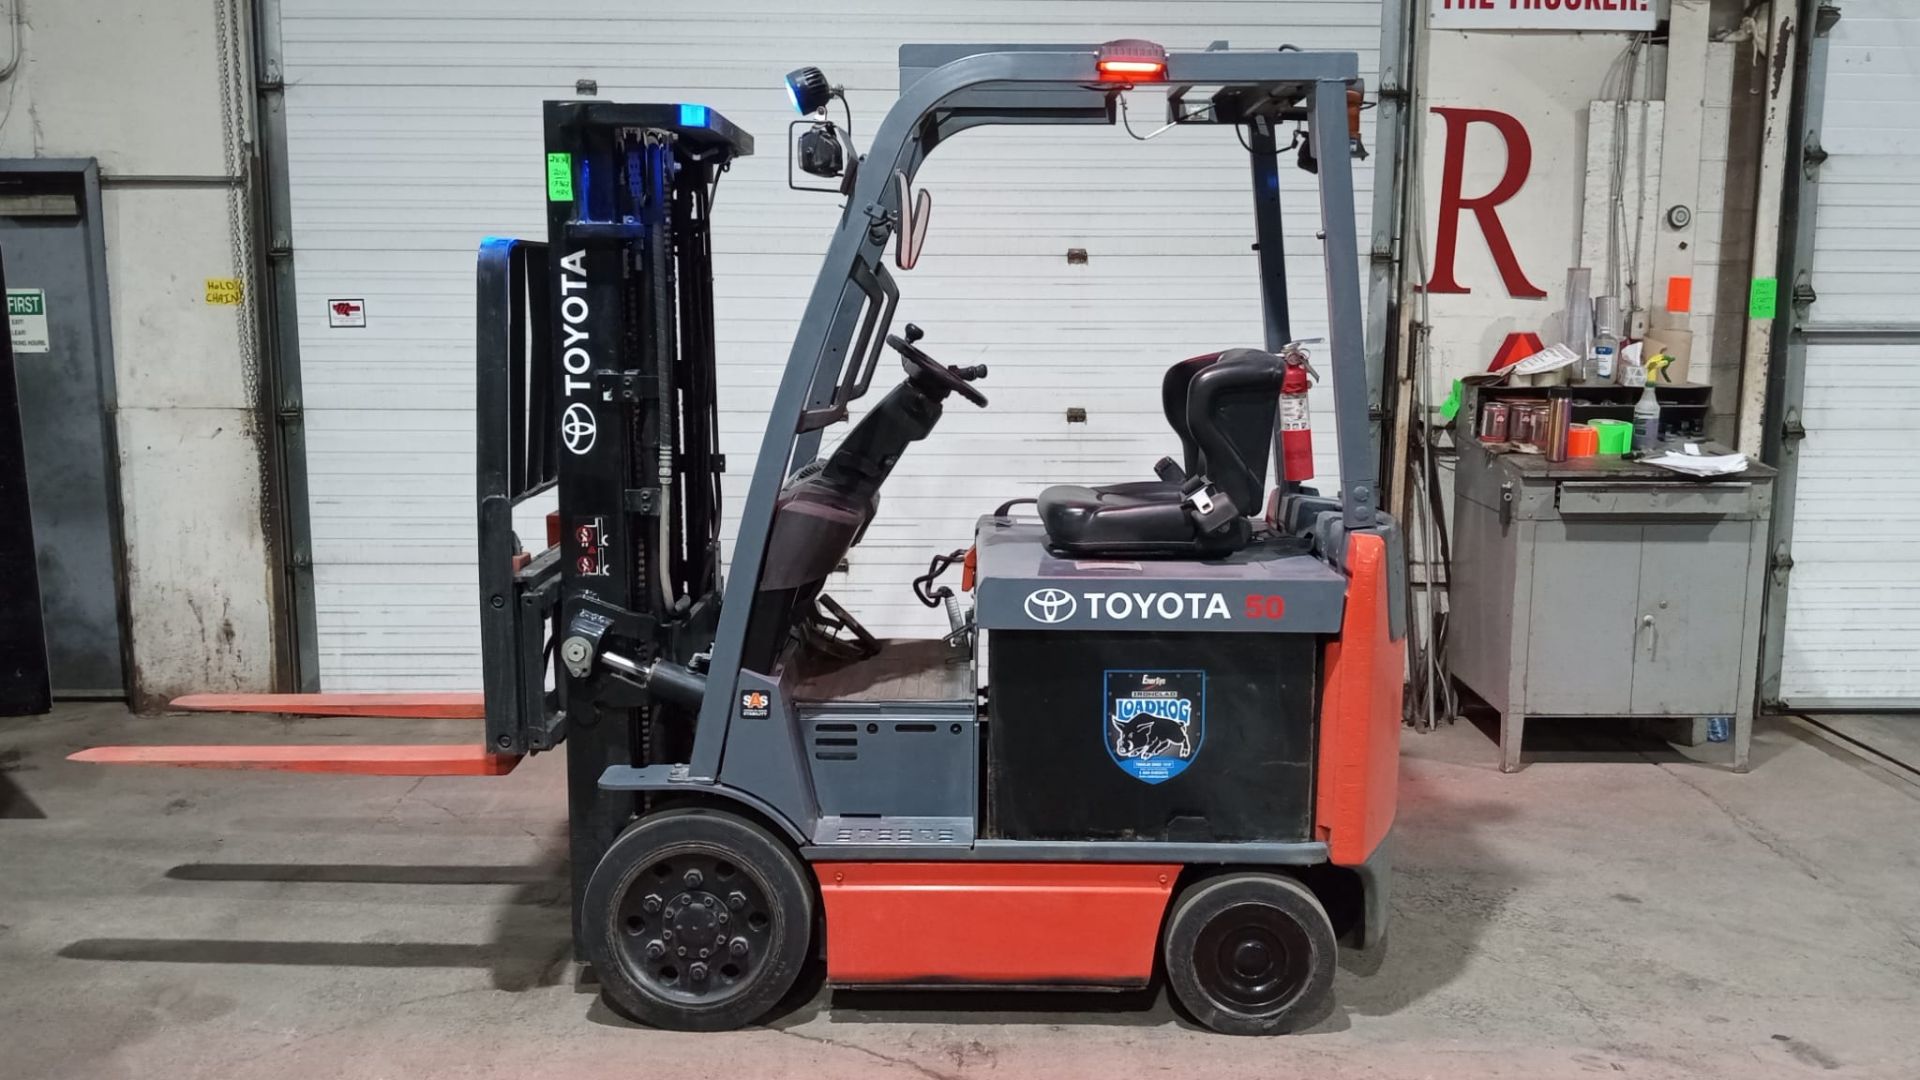 2014 TOYOTA 5,000lbs Capacity Electric Forklift 36V with sideshift & 3-Stage Mast - FREE CUSTOMS